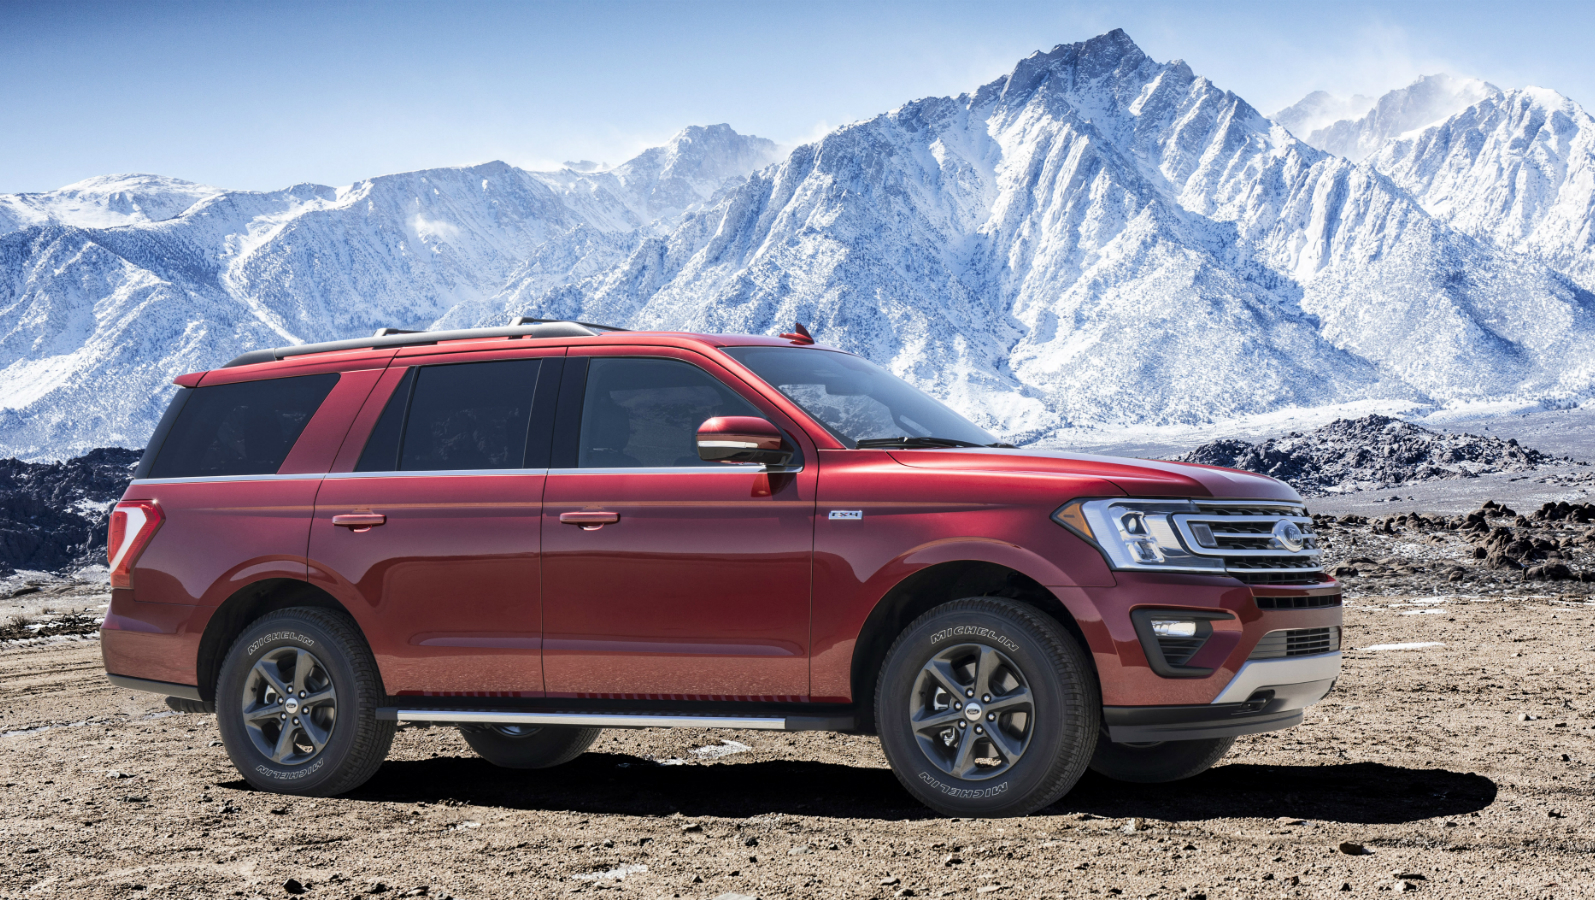 2018 Expedition FX4 Off-road package